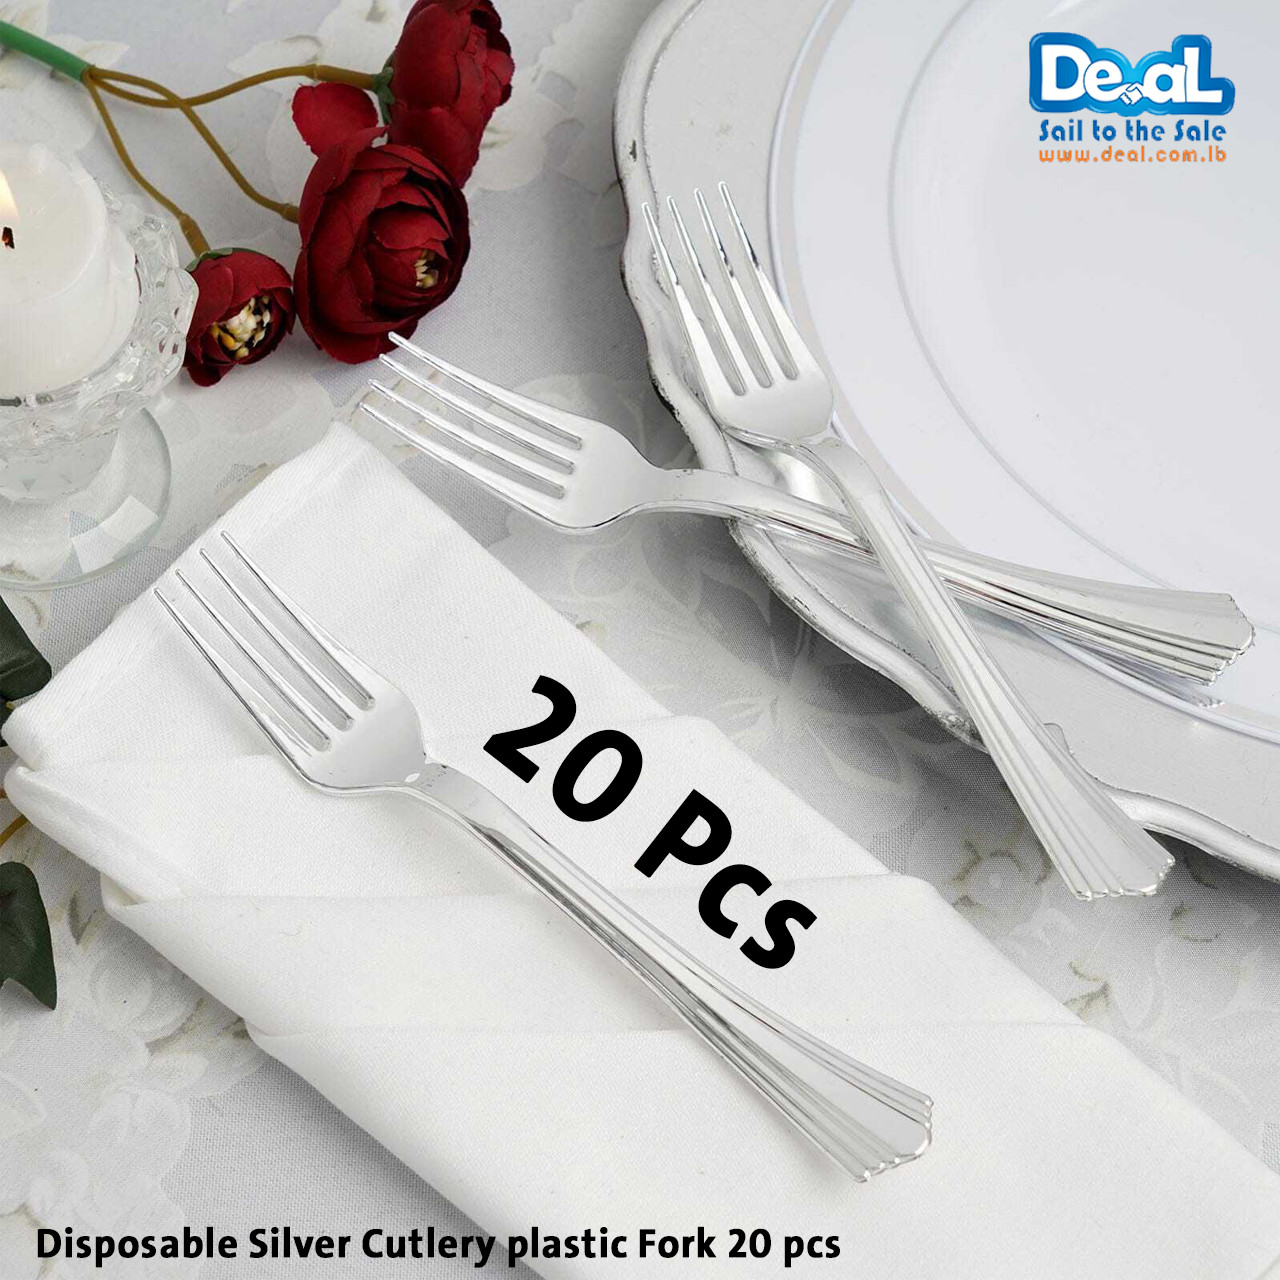 Disposable Silver Cutlery plastic Fork 20 pcs